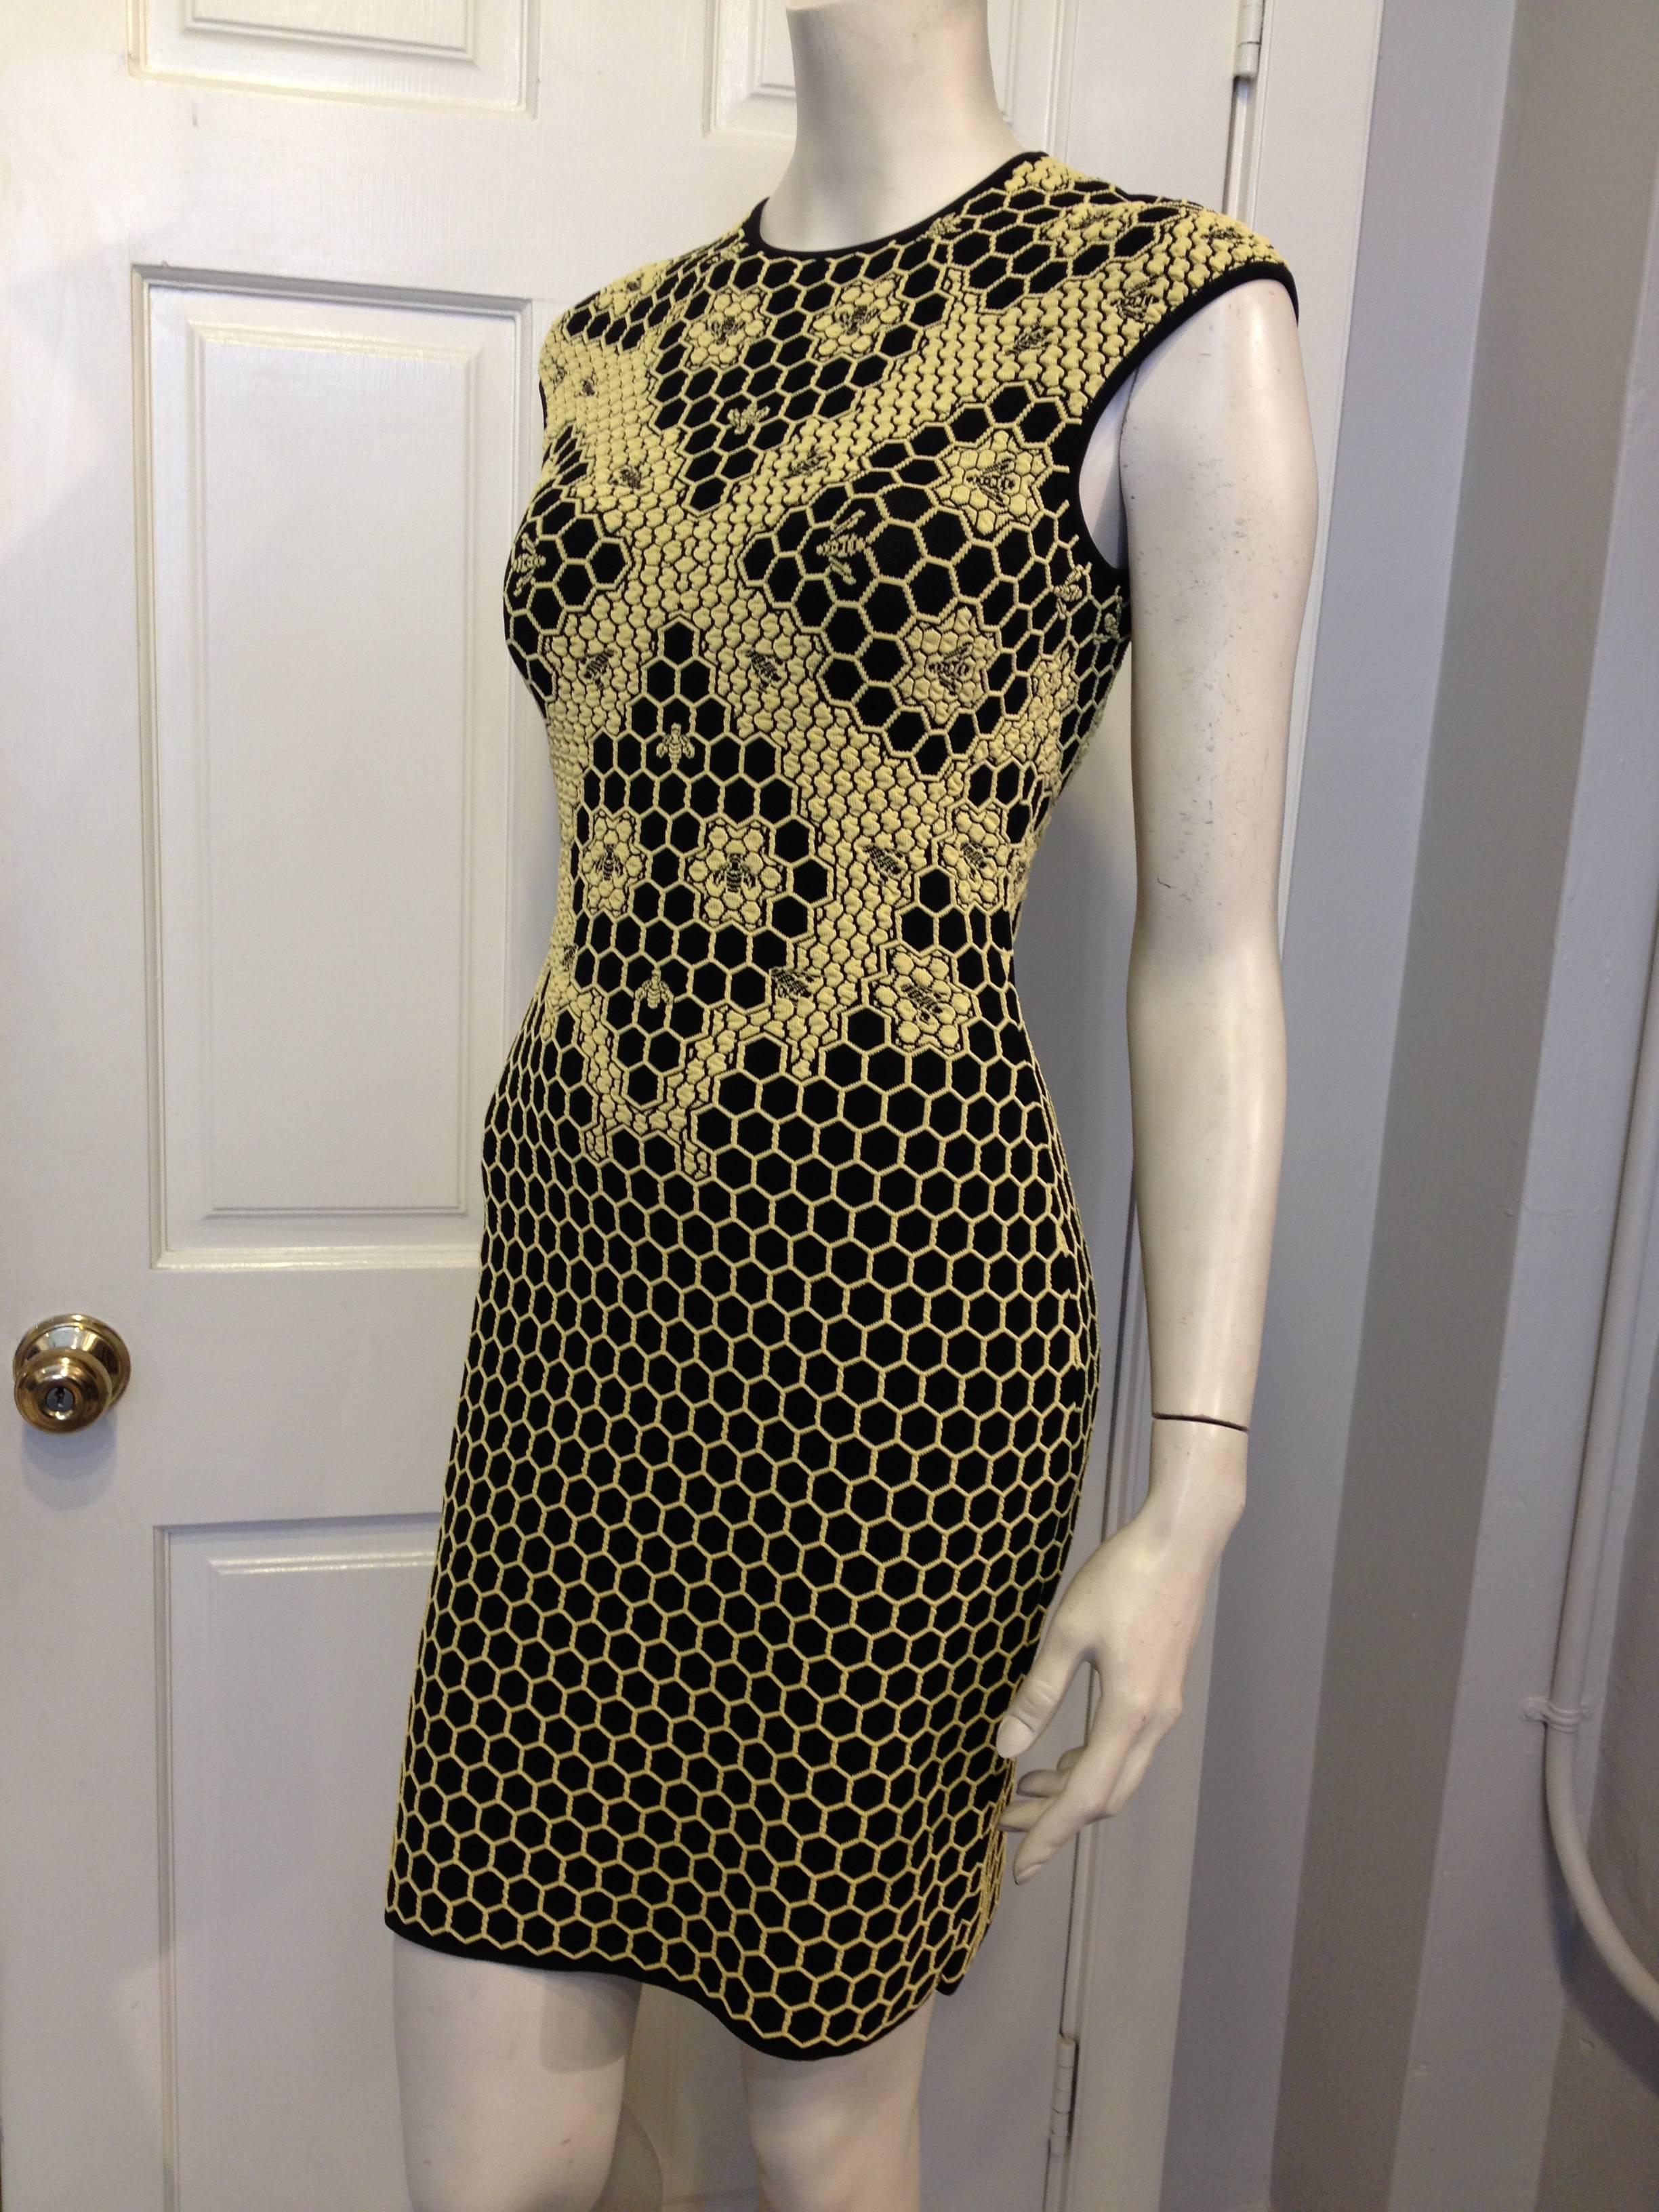 You'll be the best dressed in the hive in this Alexander McQueen piece. Yellow and black travel-friendly knit jacquard is cut into a snug bodycon fit, with a round neckline, cap sleeves, and a mini-length hemline. The material is woven with a